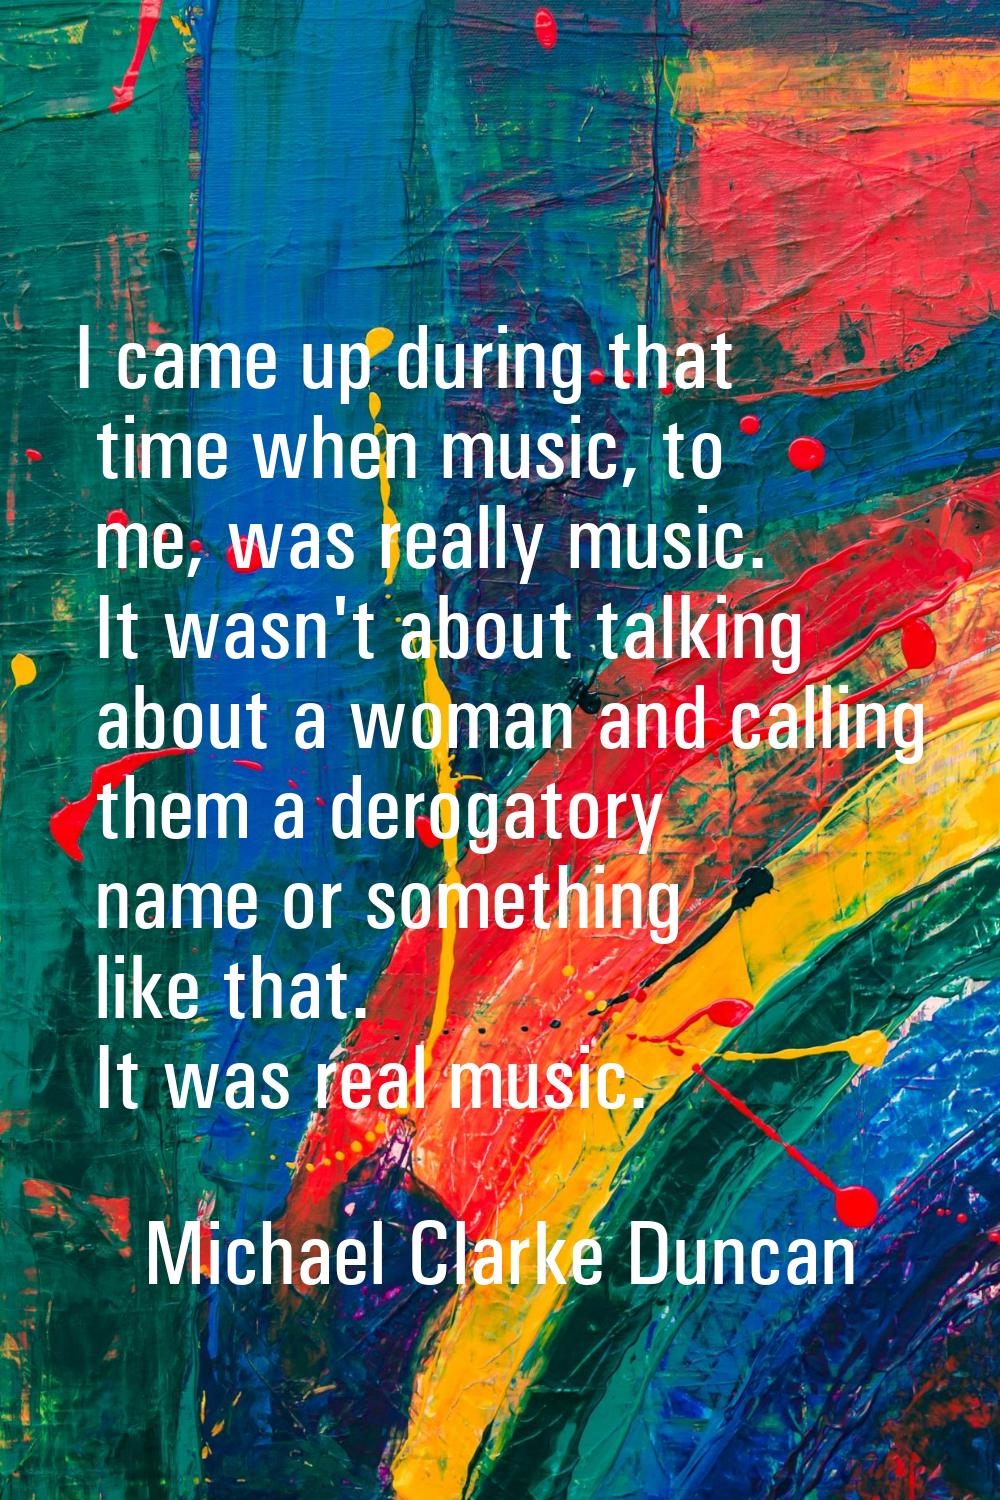 I came up during that time when music, to me, was really music. It wasn't about talking about a wom